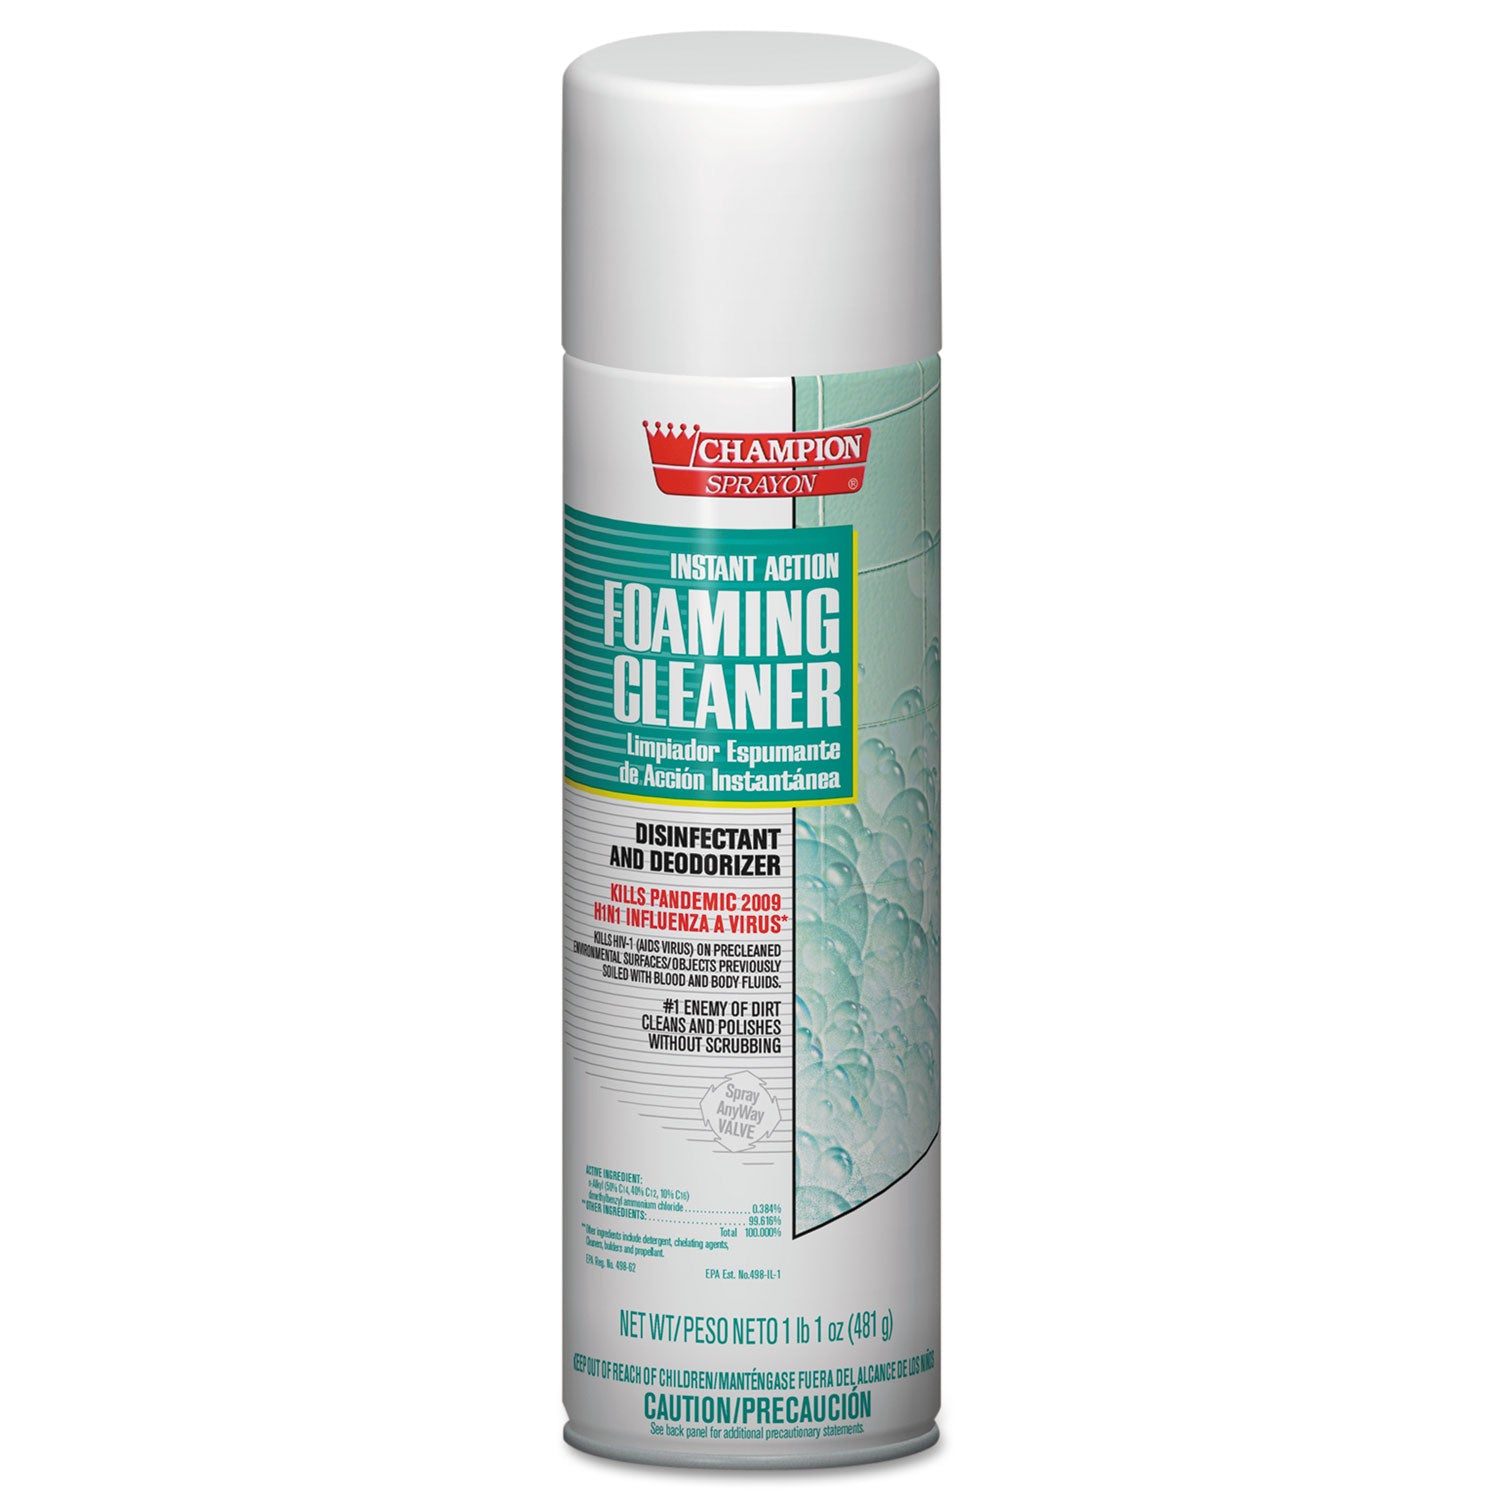 instant-action-foaming-cleaner-disinfectant-17-oz-aerosol-spray-12-carton_chp5196 - 2